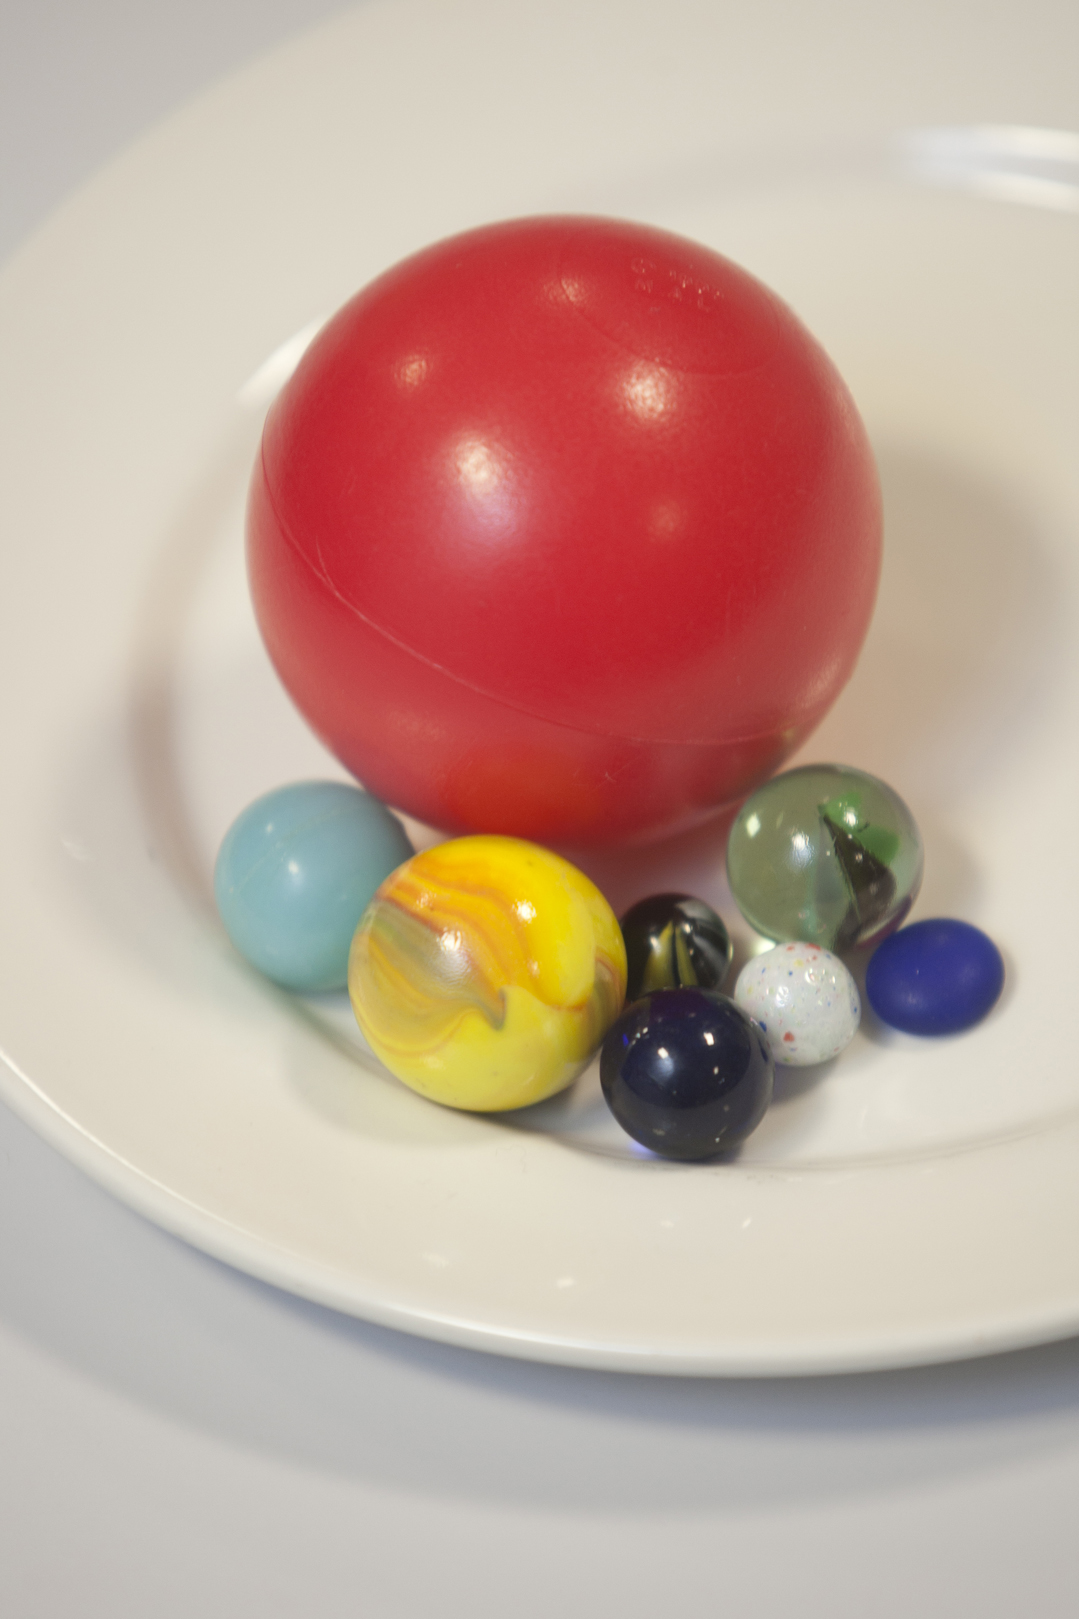 Different coloured and sized balls used for vision tests